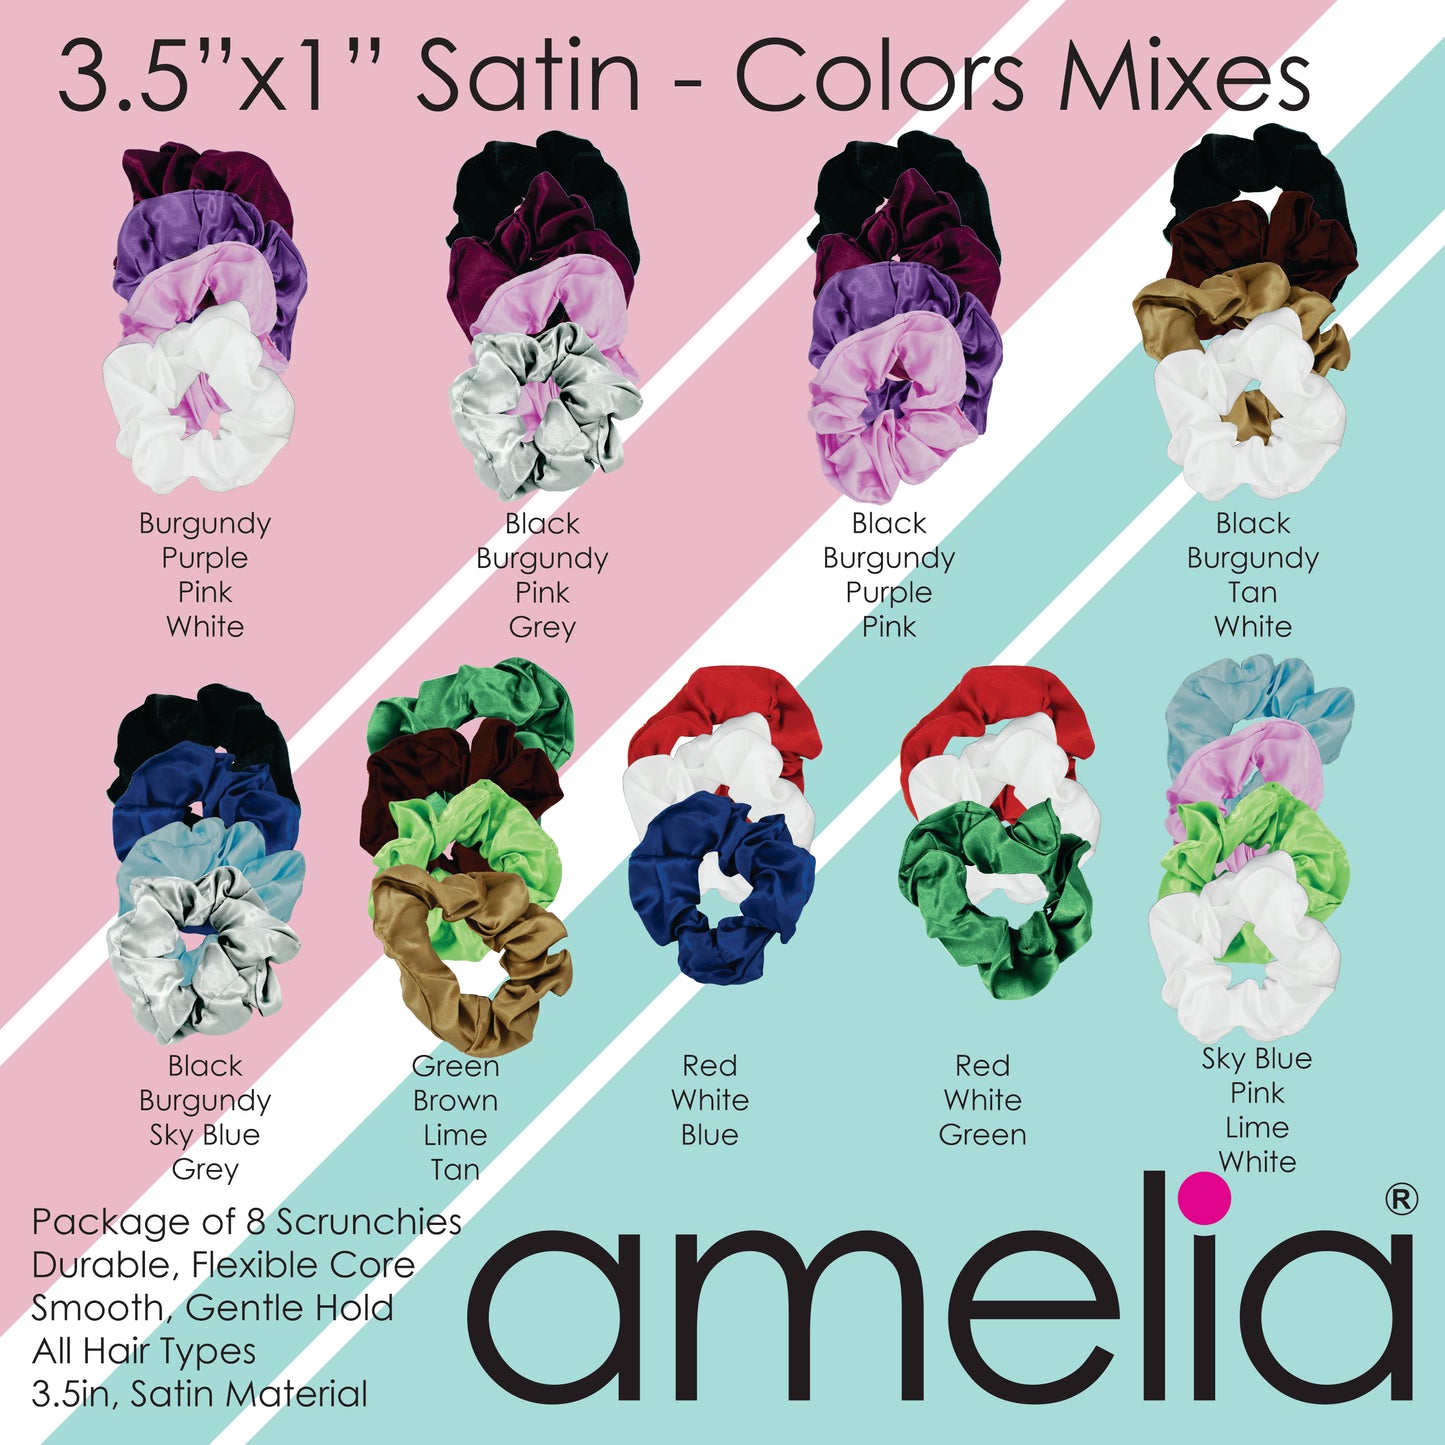 Amelia Beauty Products, Purple Satin Scrunchies, 3.5in Diameter, Gentle on Hair, Strong Hold, No Snag, No Dents or Creases. 8 Pack